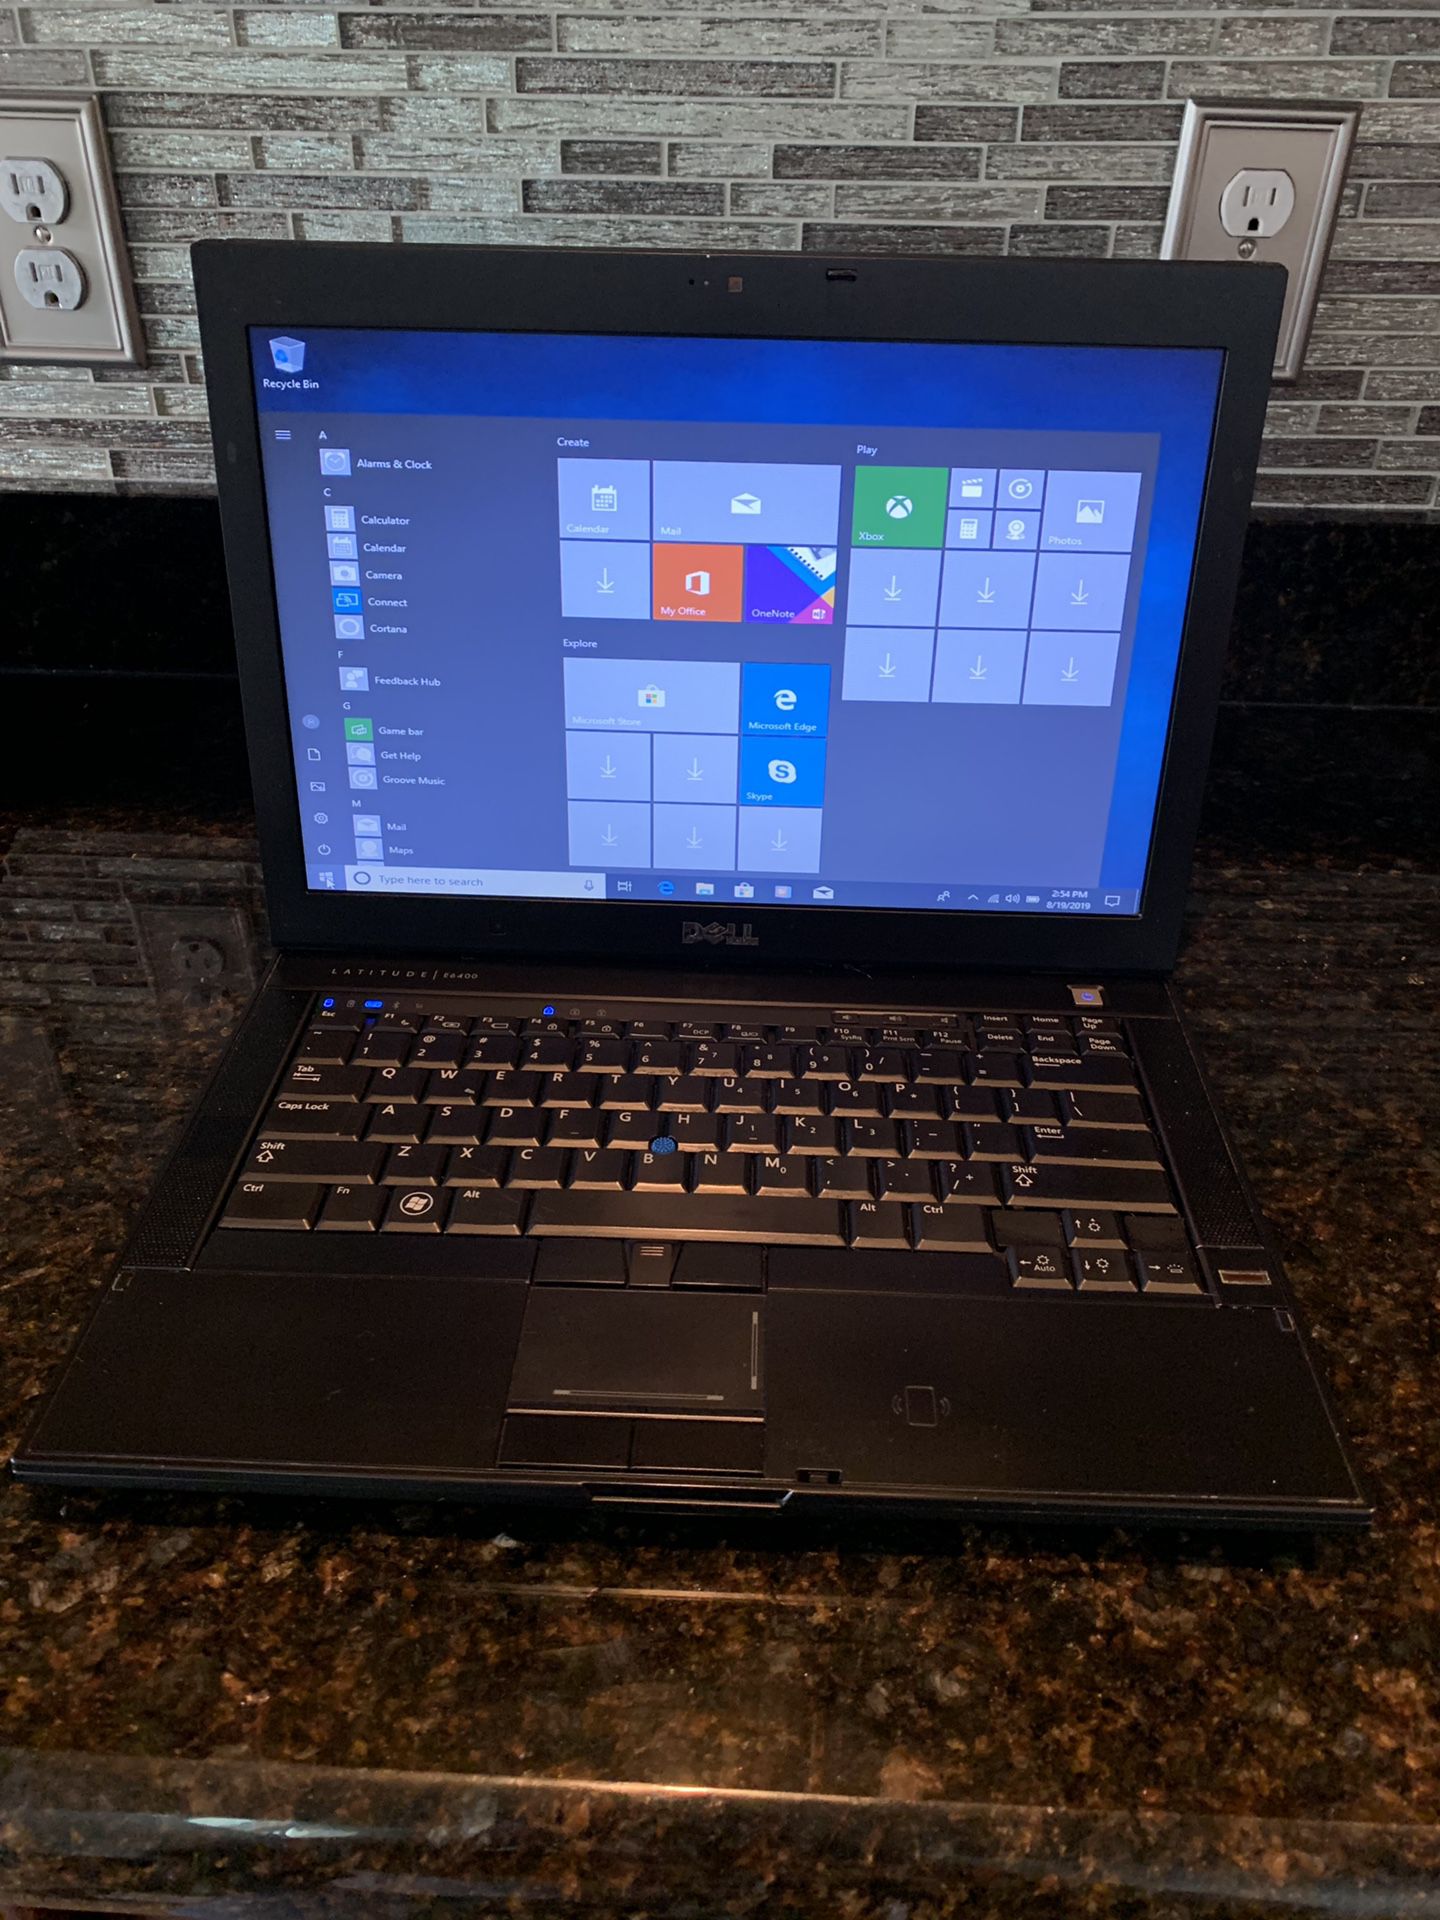 14" Dell Latitude E6400 Laptop with Webcam, Windows 10 and Microsoft Office.